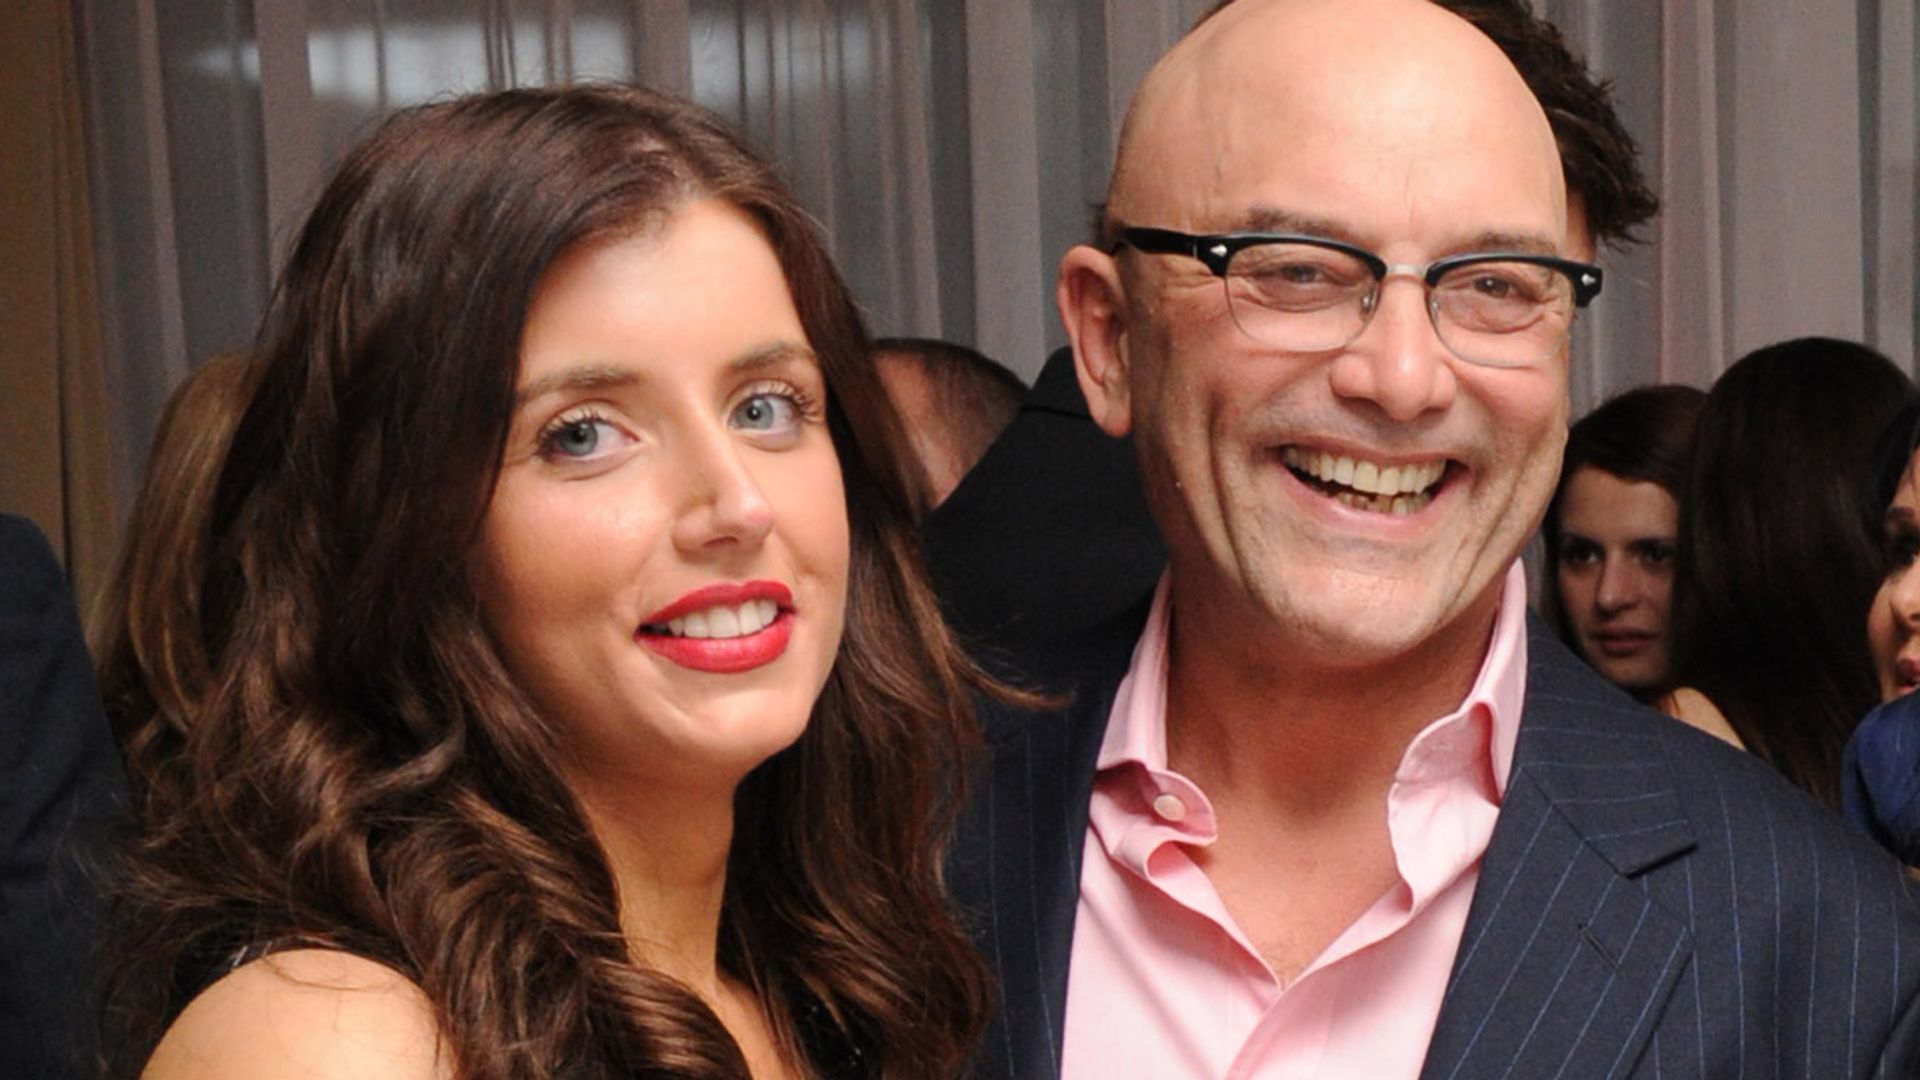 Anne-Marie in a black dress and red lipstick with Greg Wallace in a pinstripe suit and pink shirt